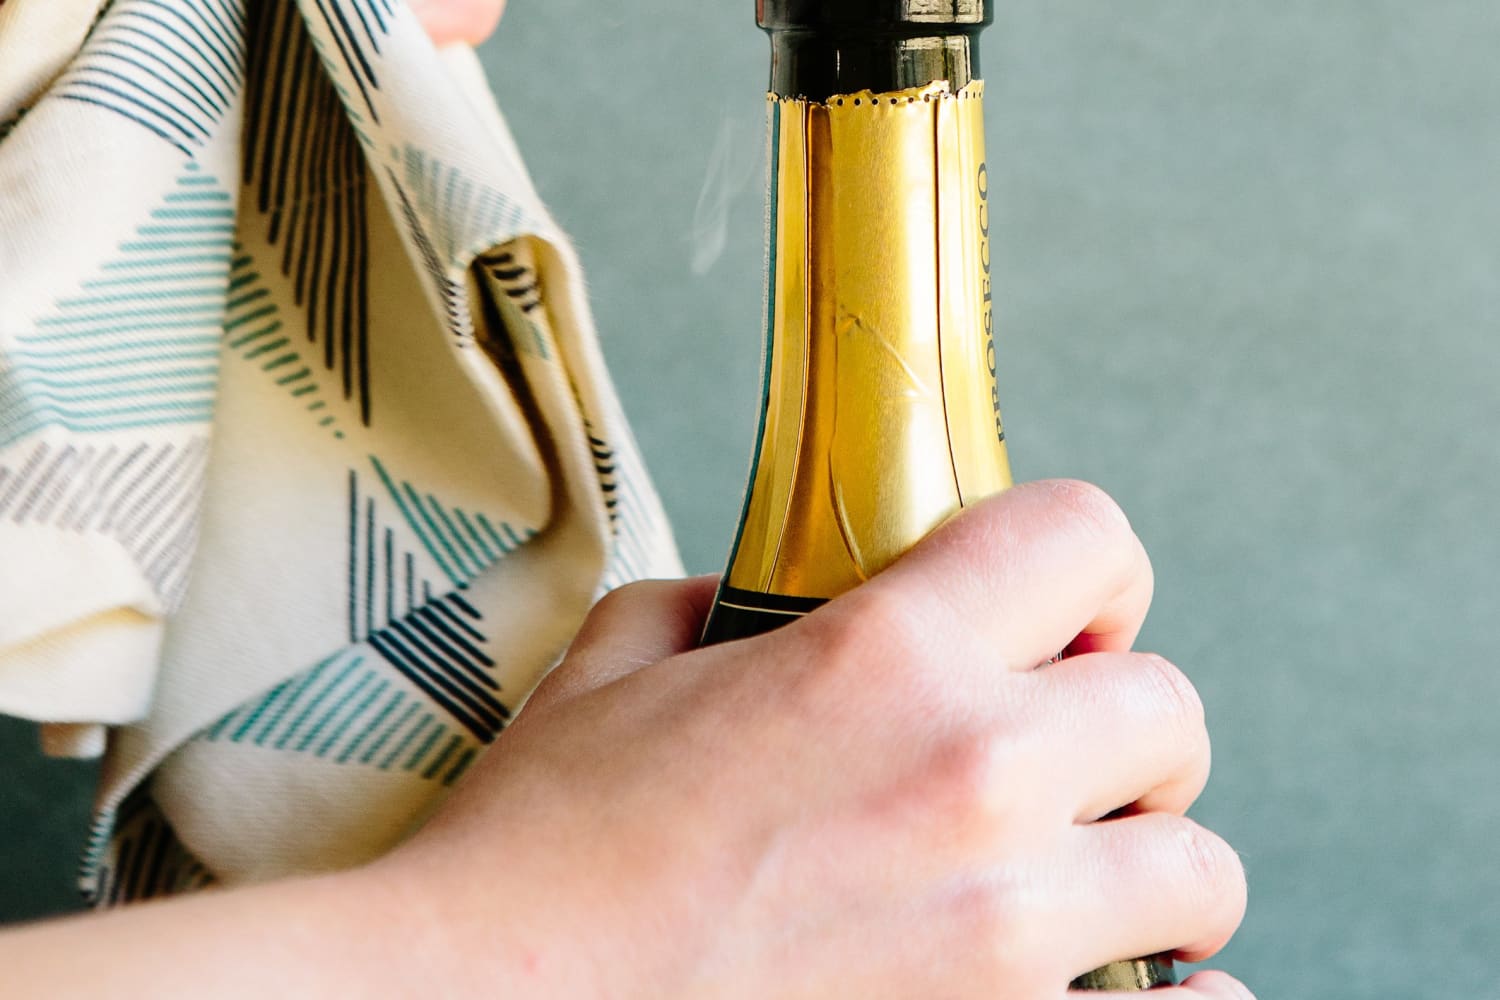 The Best Champagne to Buy Is Grower Champagne - Eater